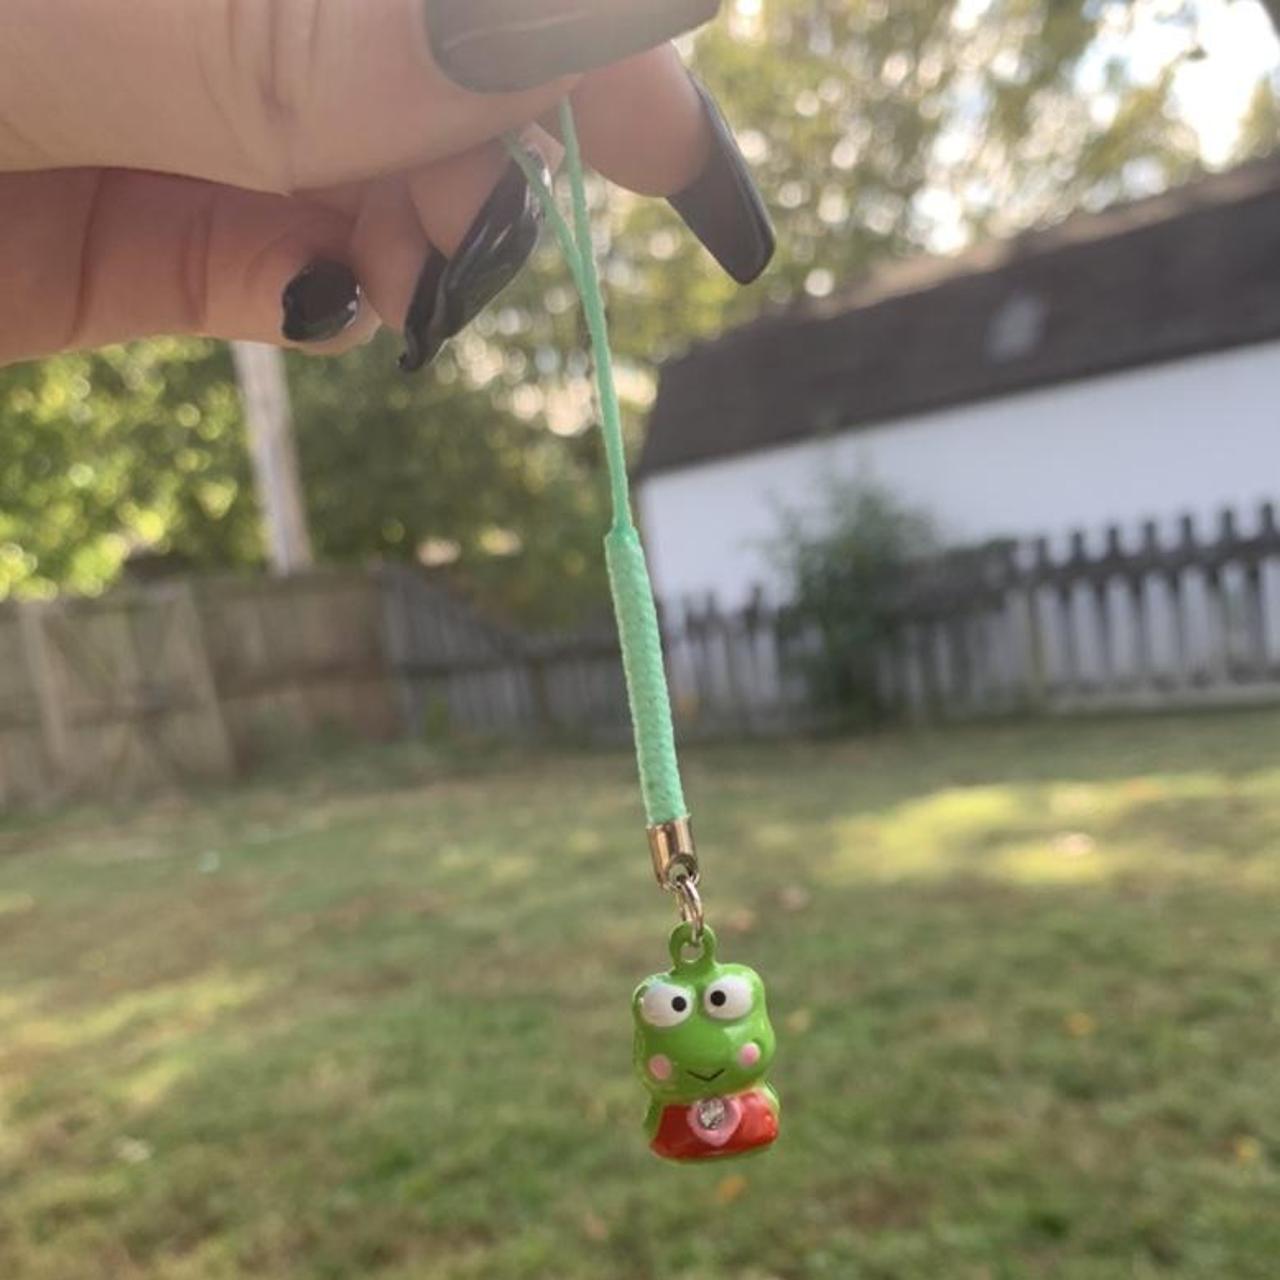 Product Image 1 - Super cute keroppi cellphone charm